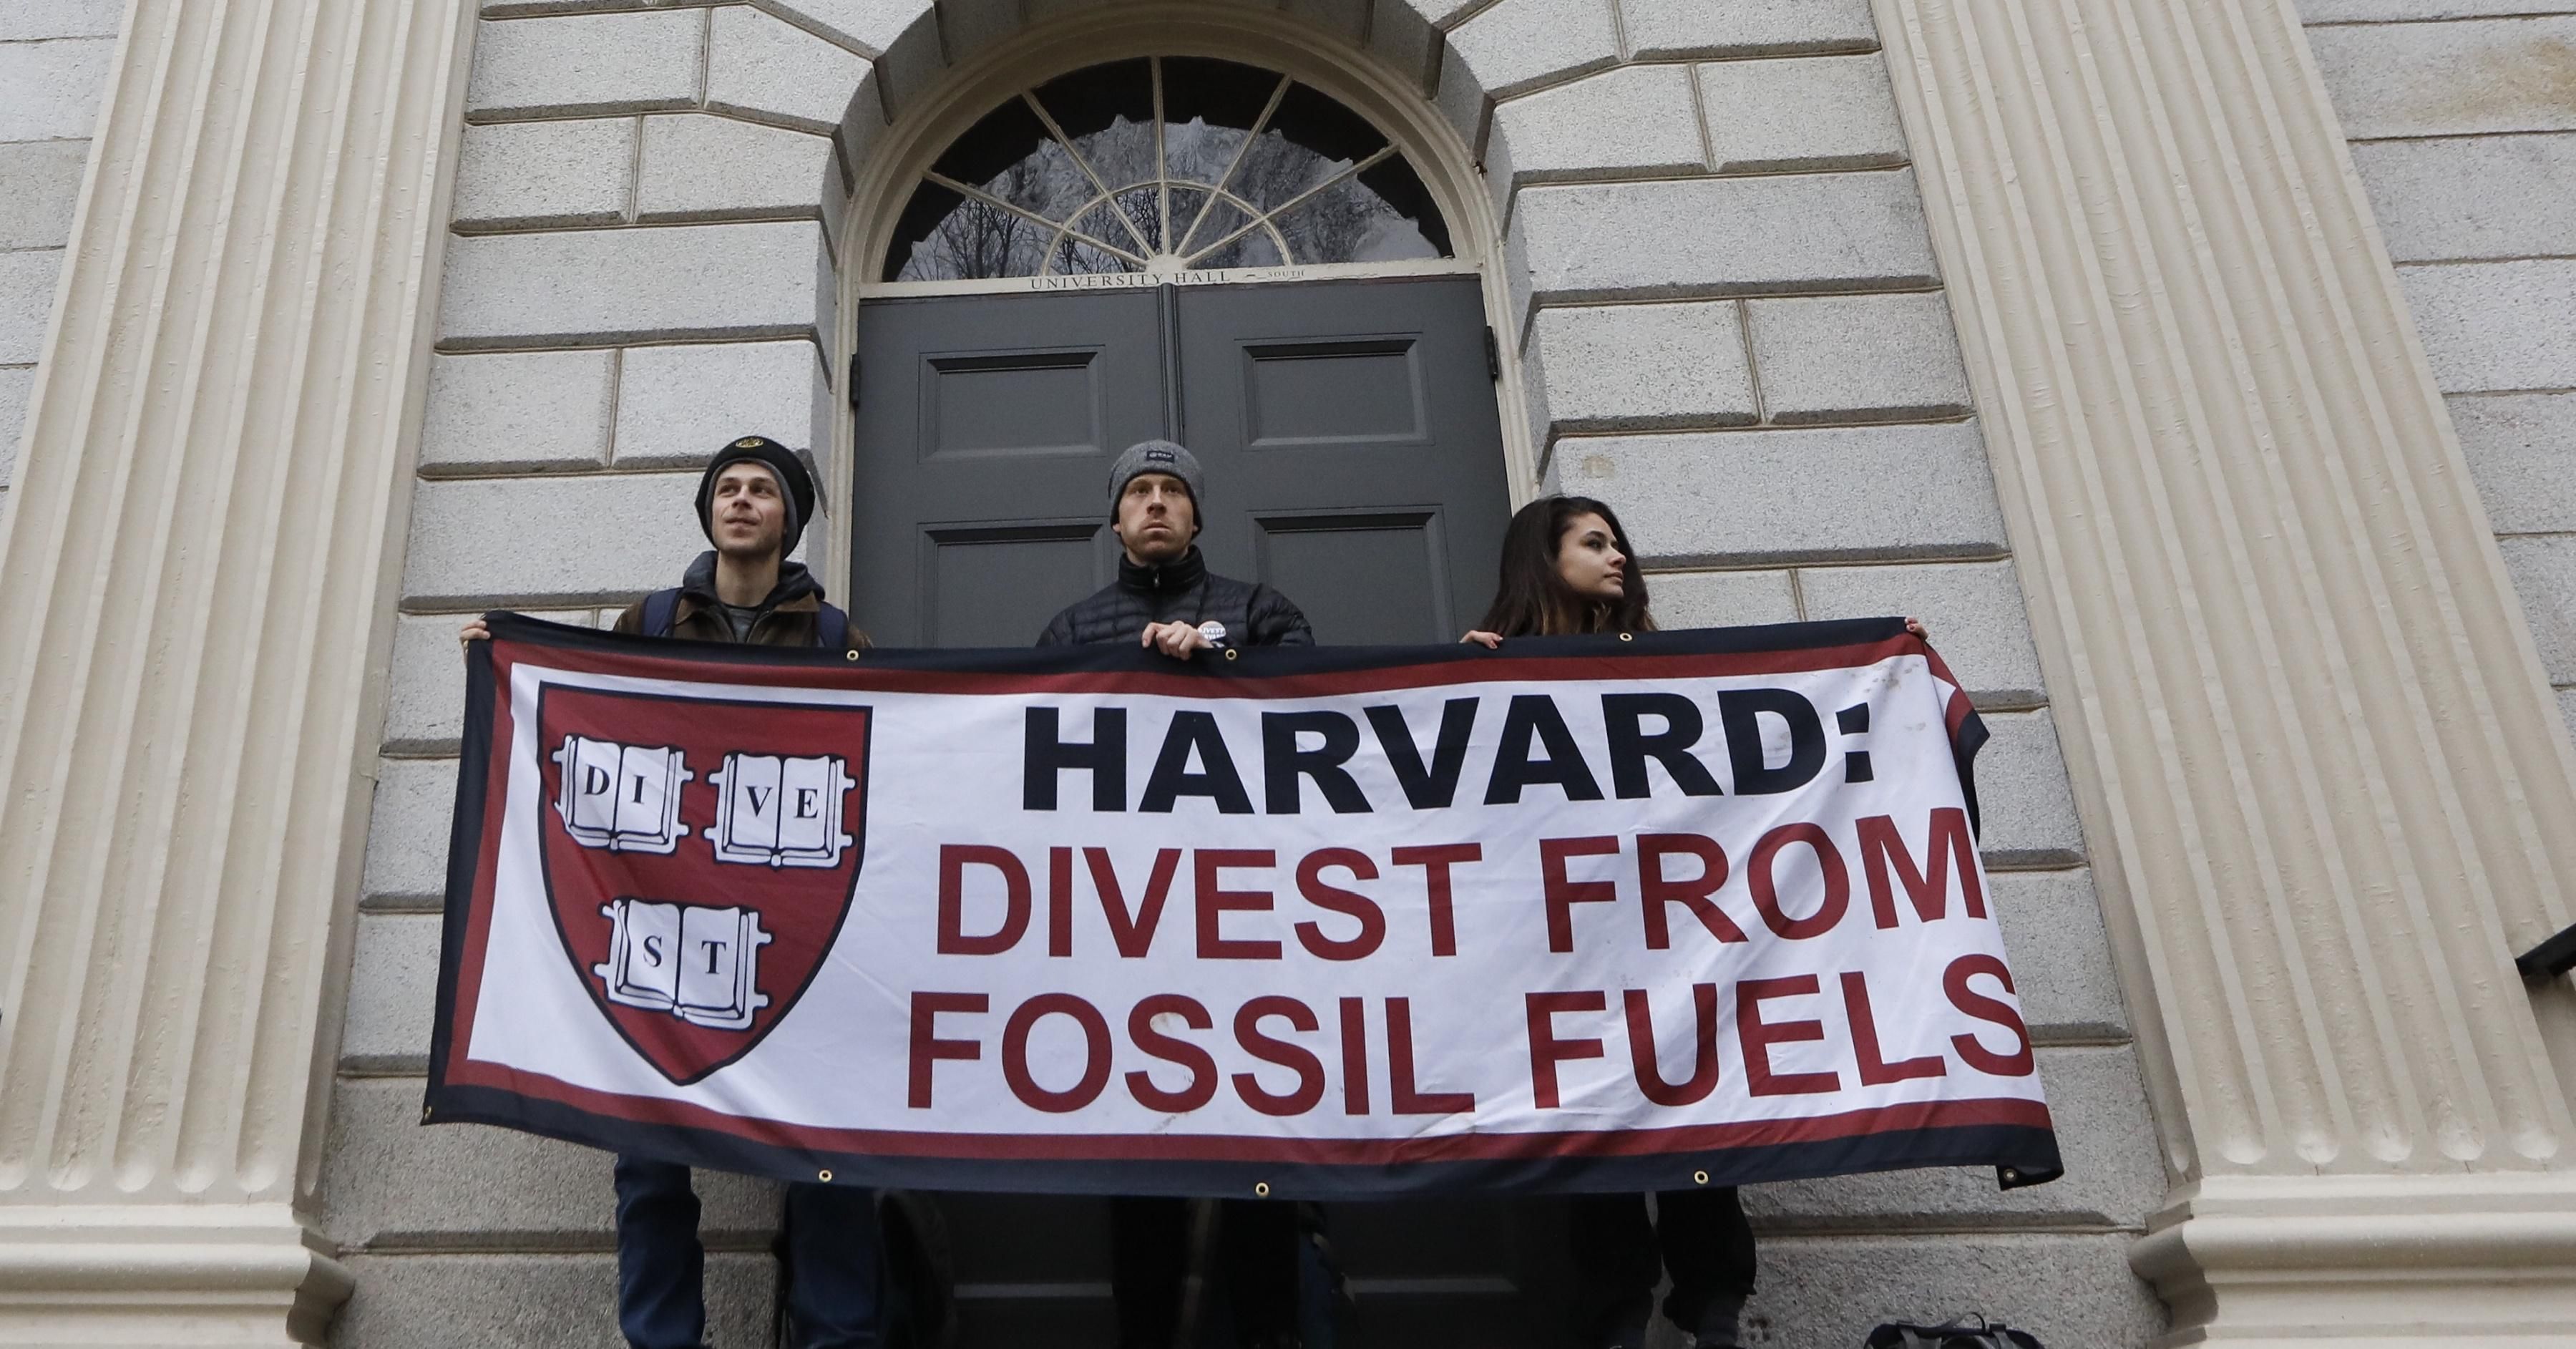 Students demanding that Harvard University divest from fossil fuels block the entrance to University Hall on the school's campus in Cambridge, MA on Mar. 28, 2017. (Photo: Keith Bedford/The Boston Globe via Getty Images)